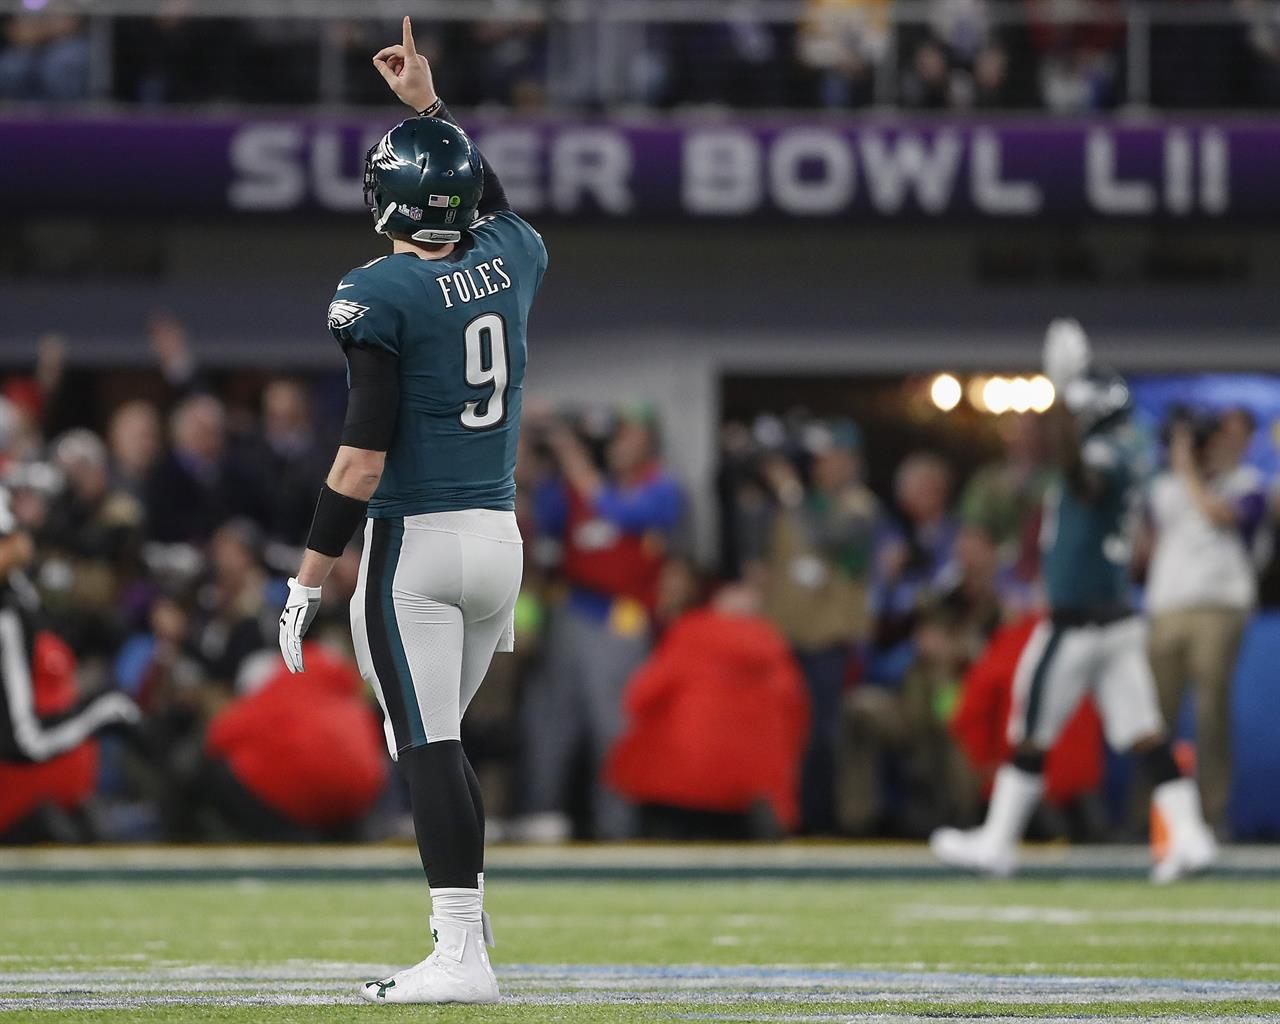 Foles outduels Brady to give Eagles their first Super Bowl AM 920 The